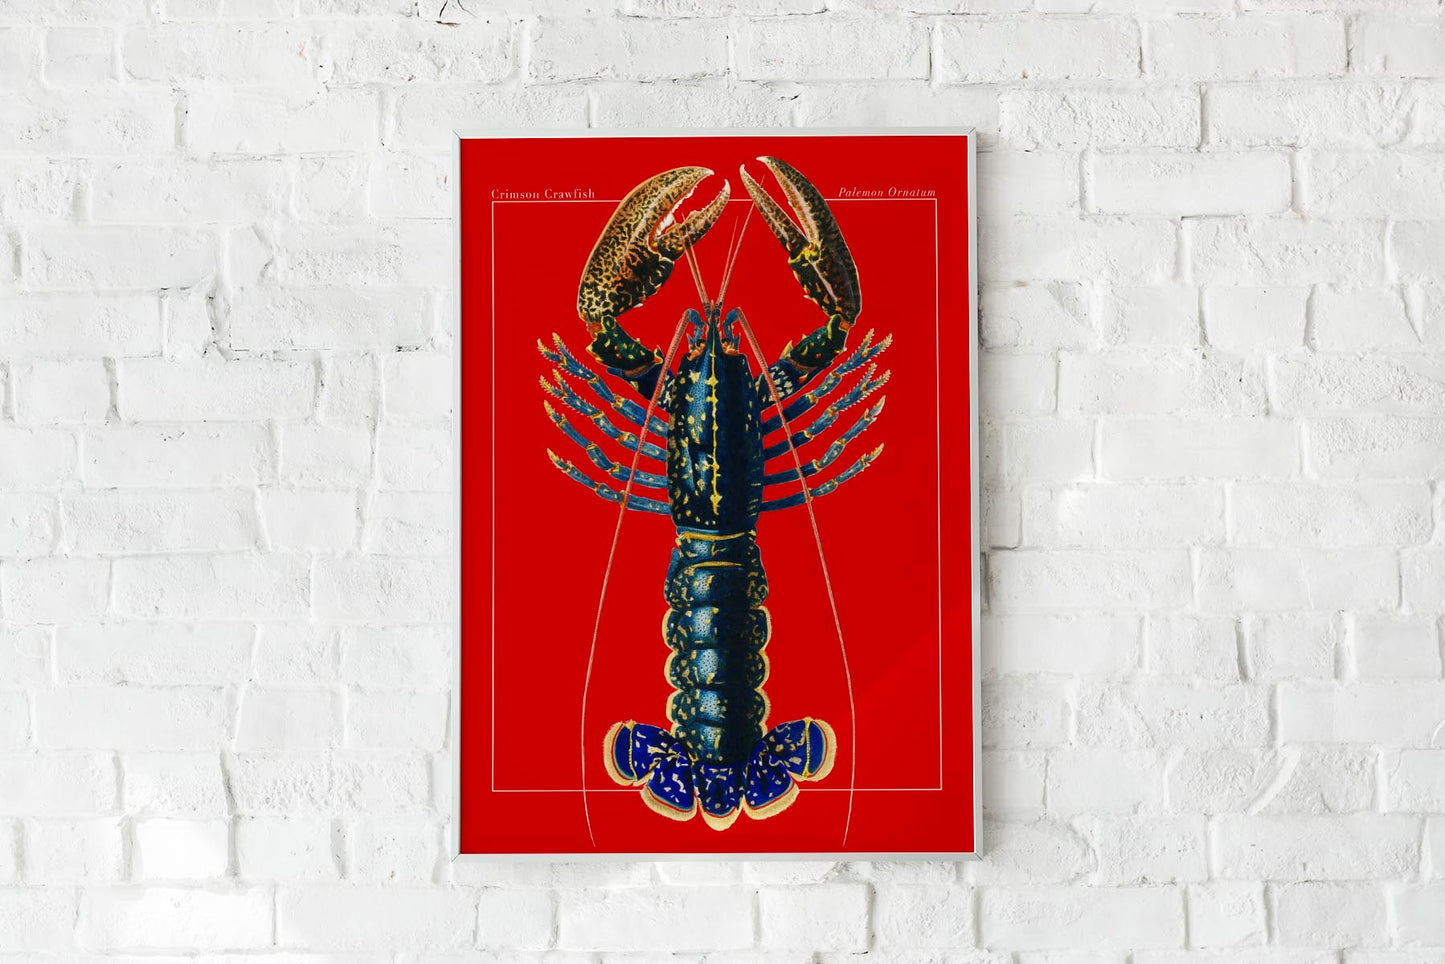 Red Lobster Poster